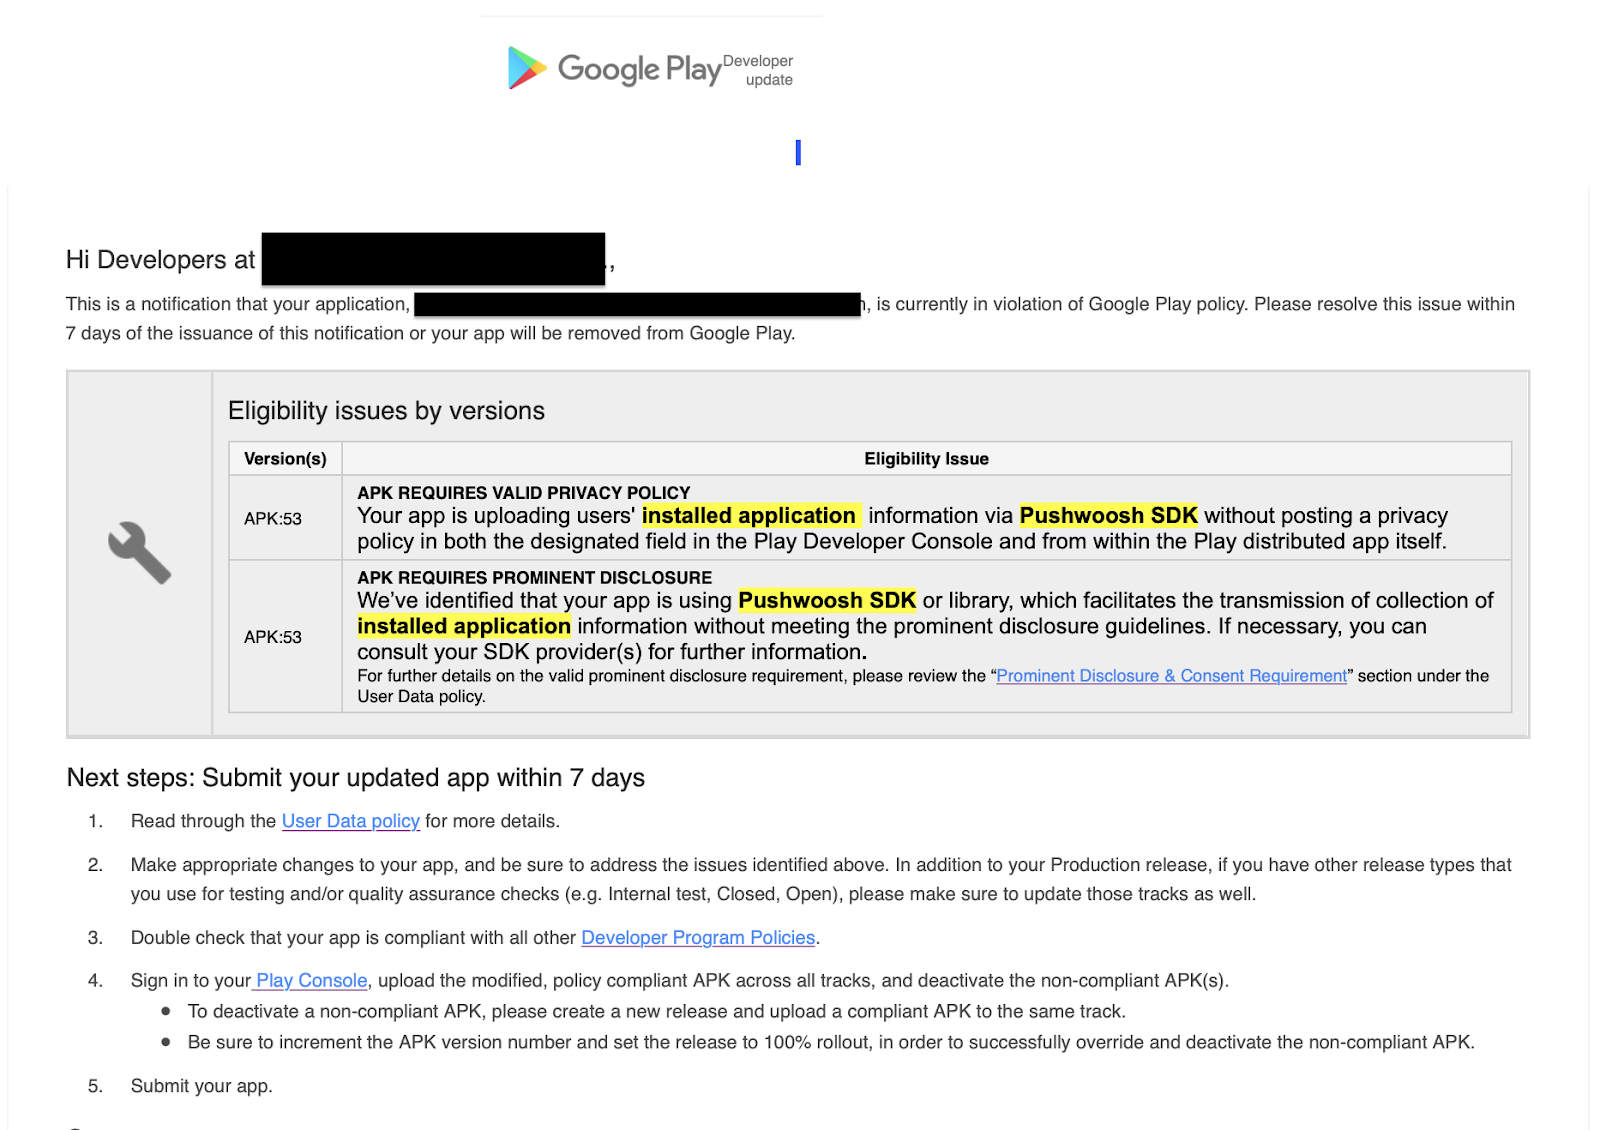 Google Play developers will be able to push you to update your apps